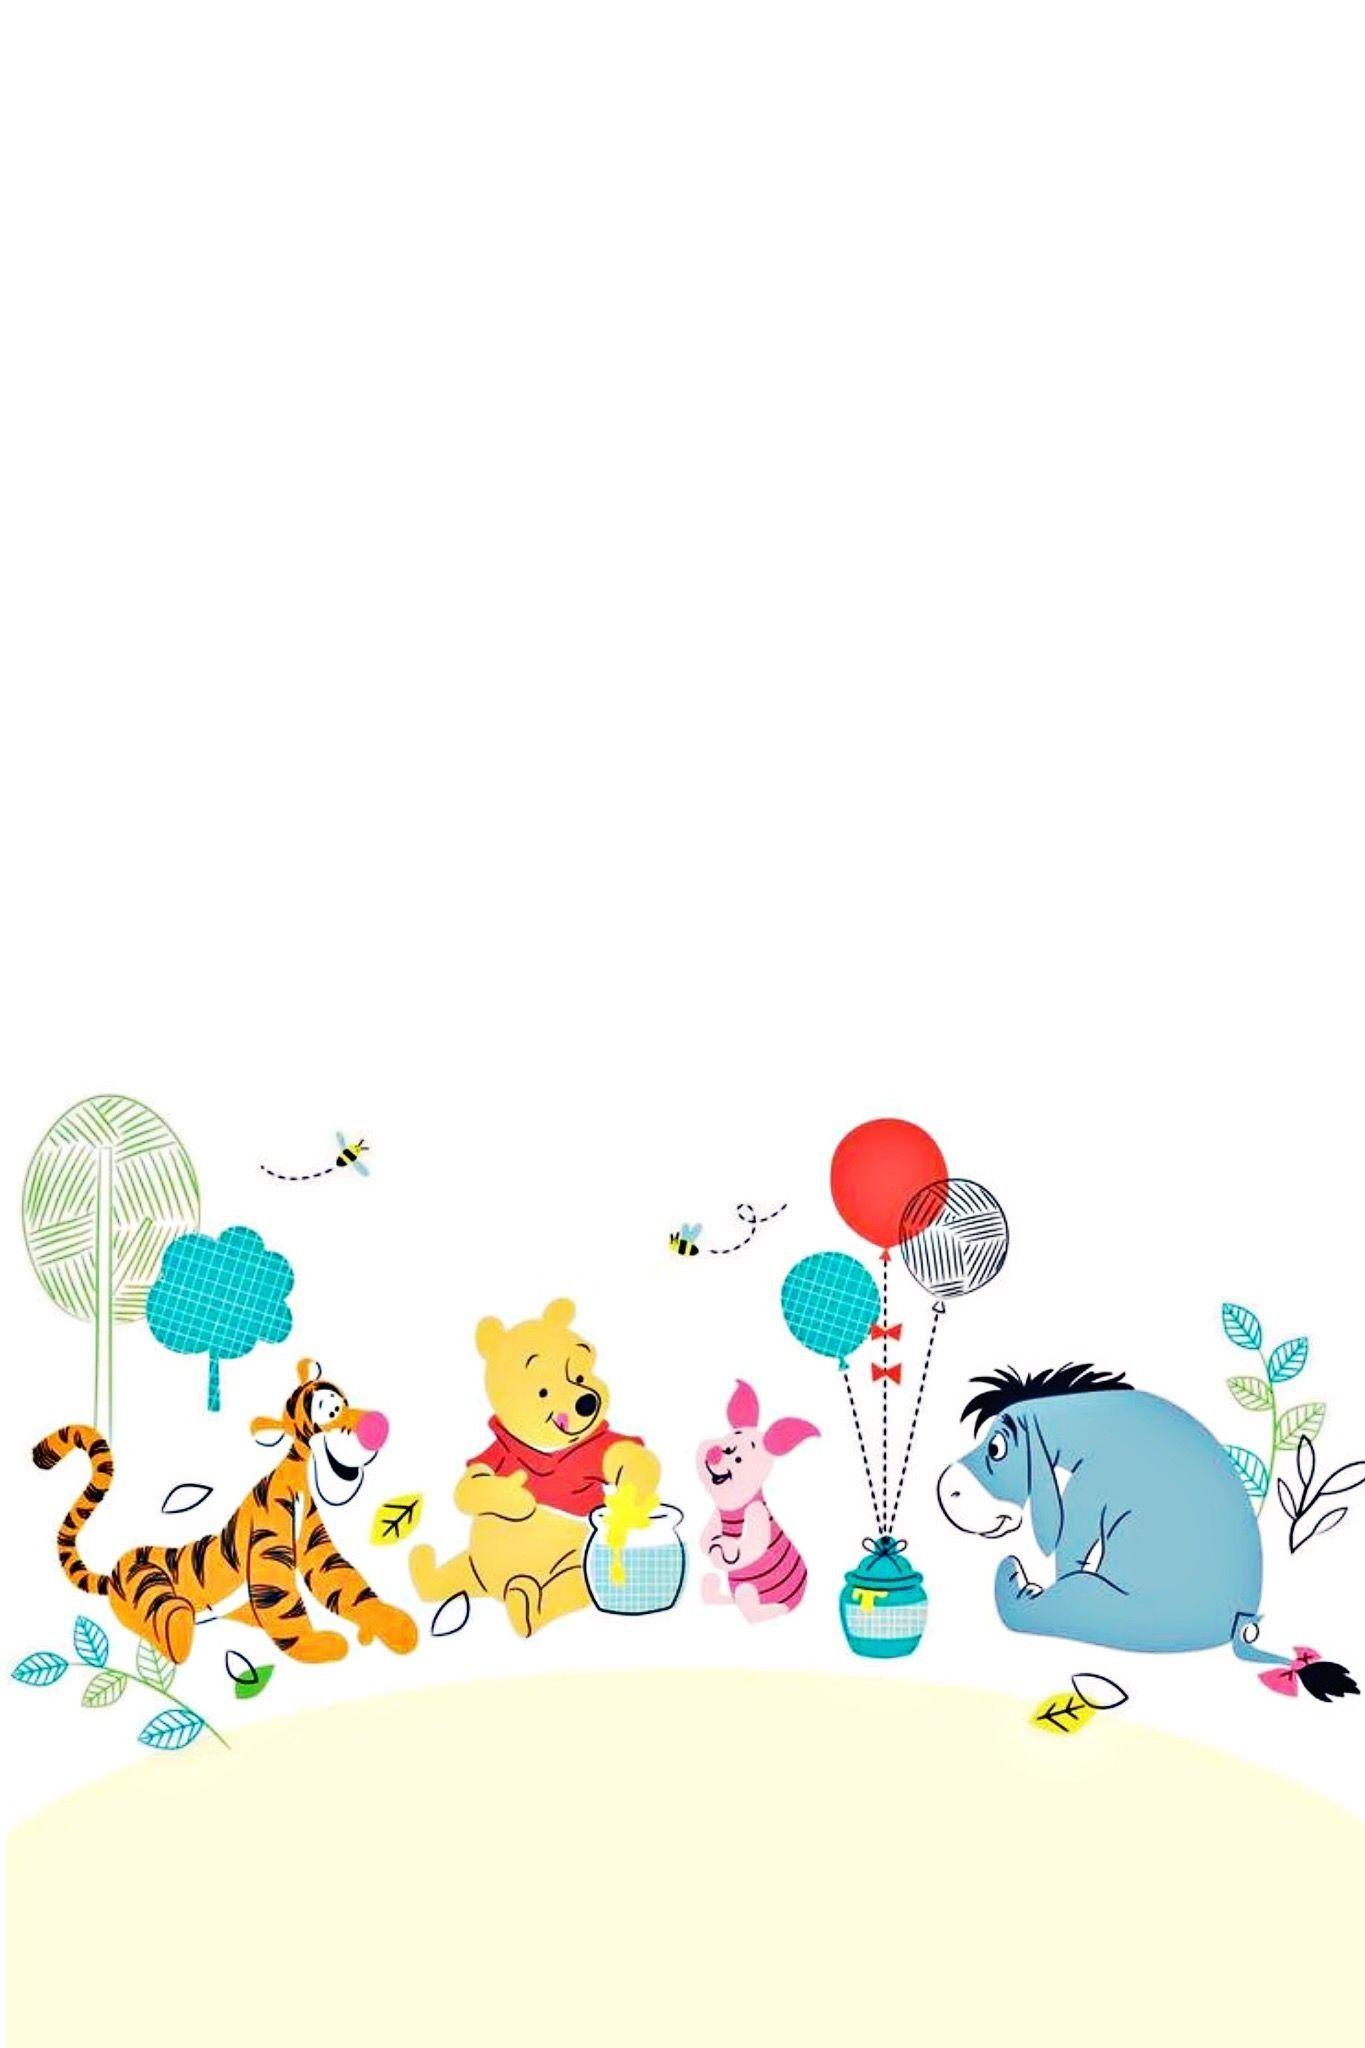 Winnie The Pooh IPhone Wallpaper  IPhone Wallpapers  iPhone Wallpapers